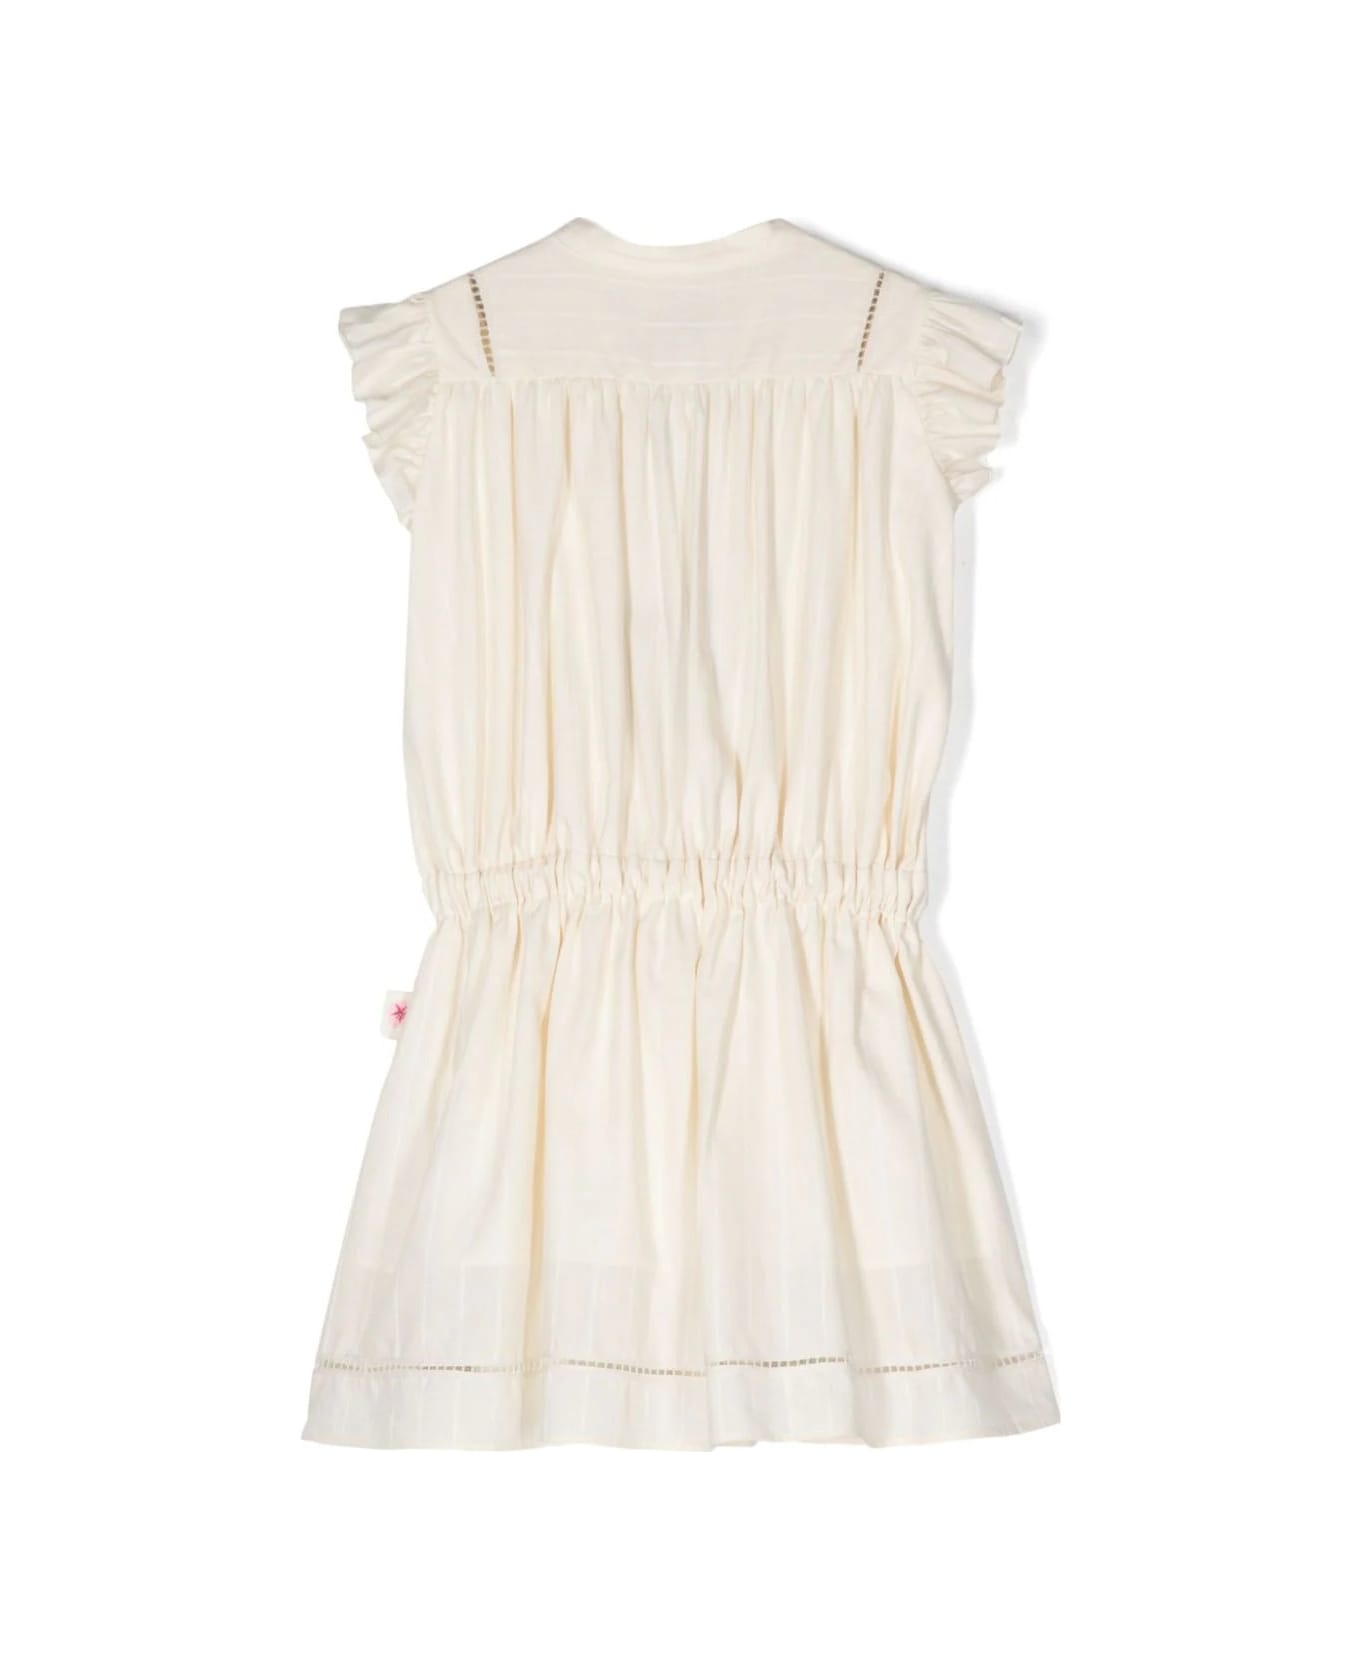 Etro Beige Pinstripe Dress With Ruffles And Embroidery - Brown